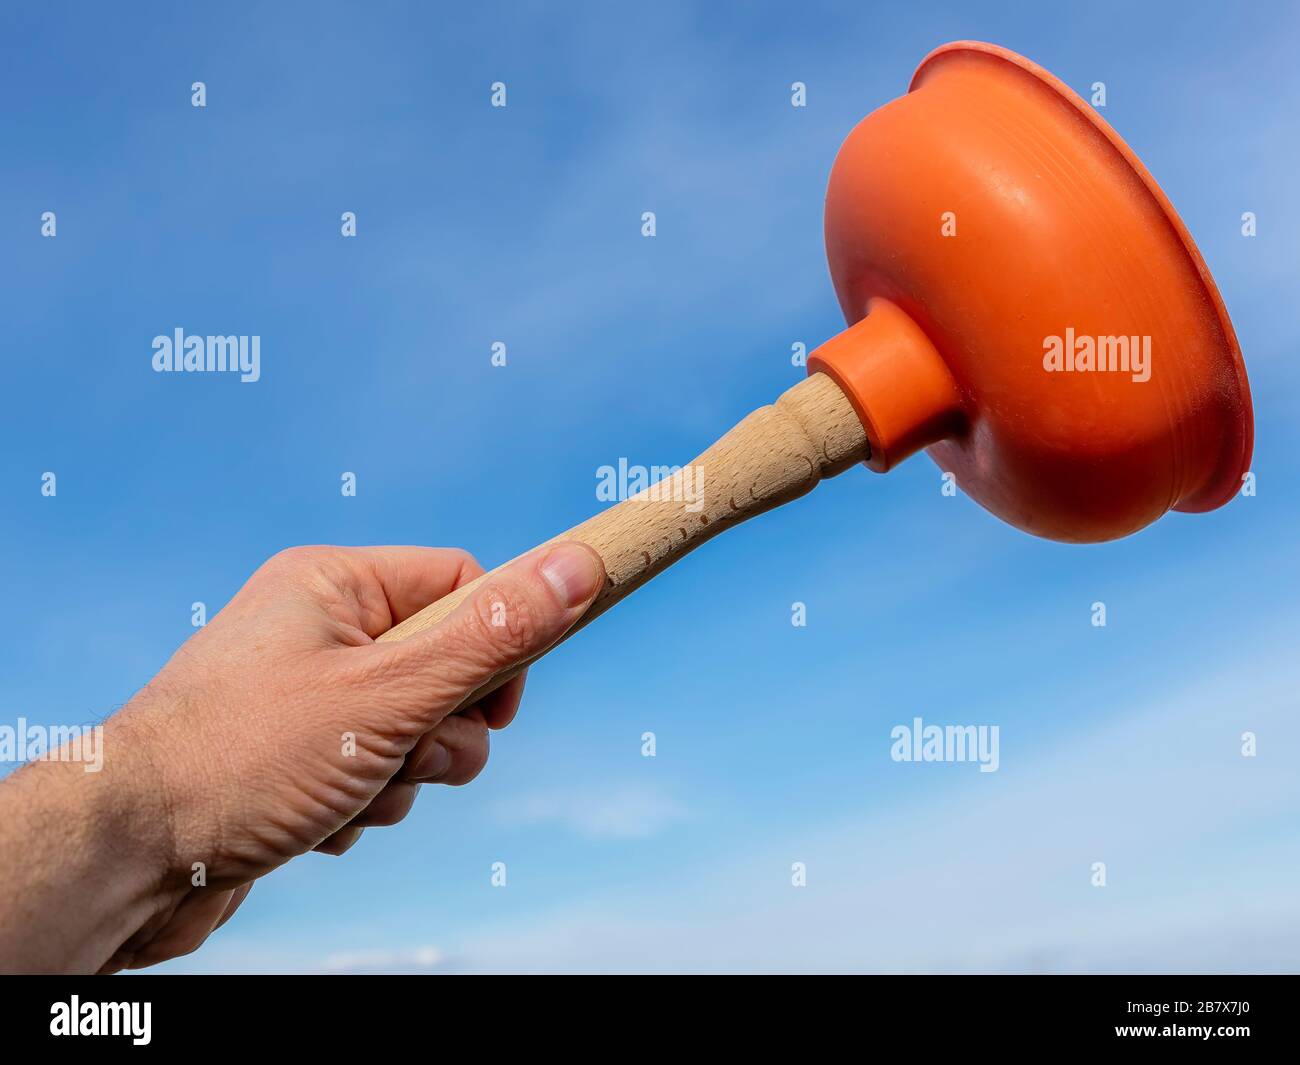 Plumber's drain cleaner tool. Rubber suction cup with wooden handle Stock  Photo - Alamy